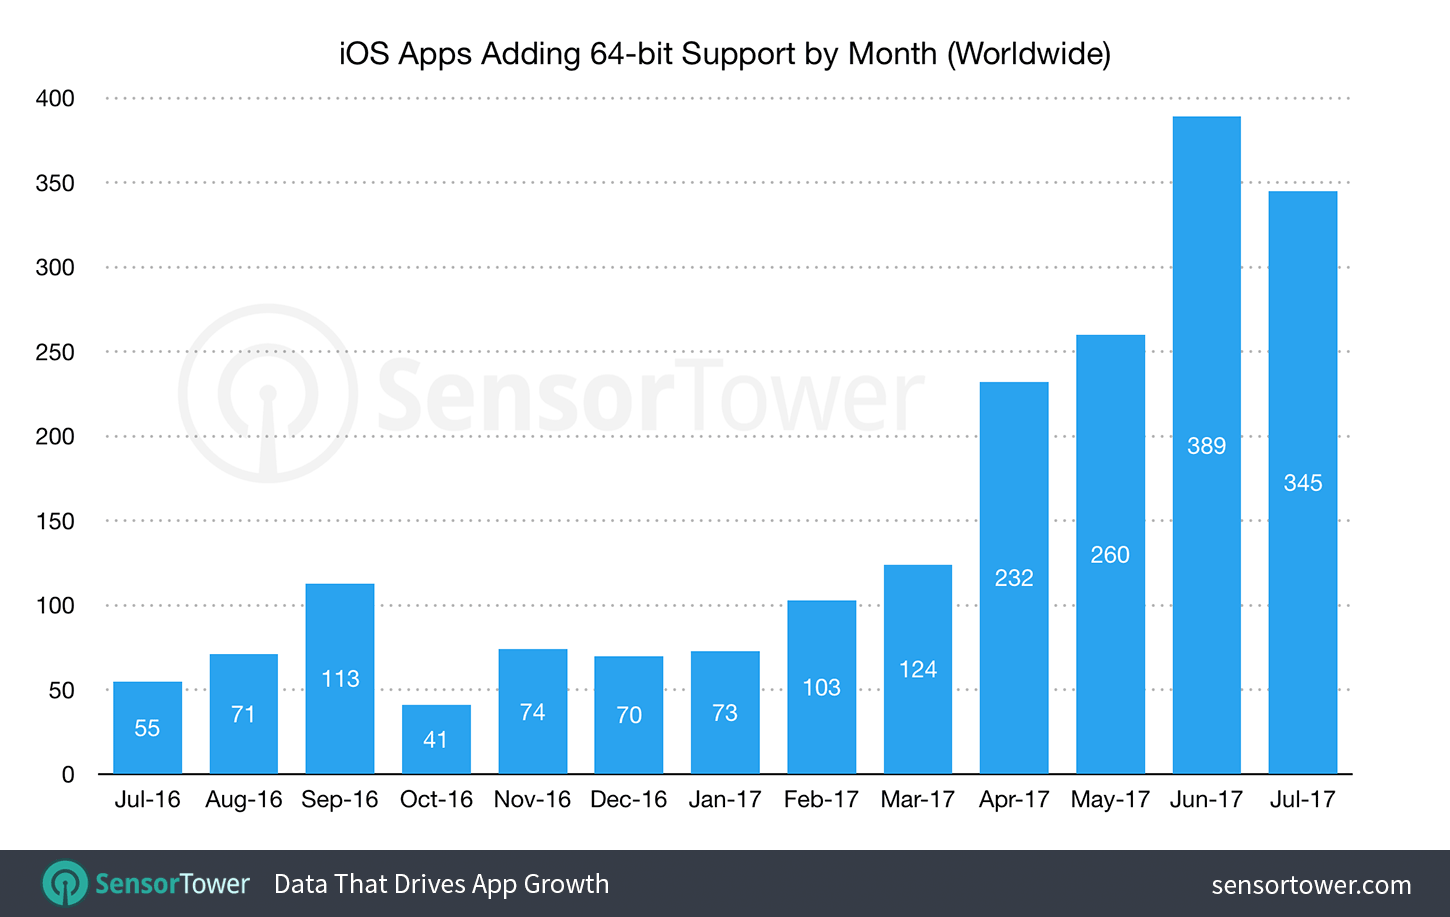 64-bit iOS App Updates Have Increased by Almost 230% in the Past Six Months